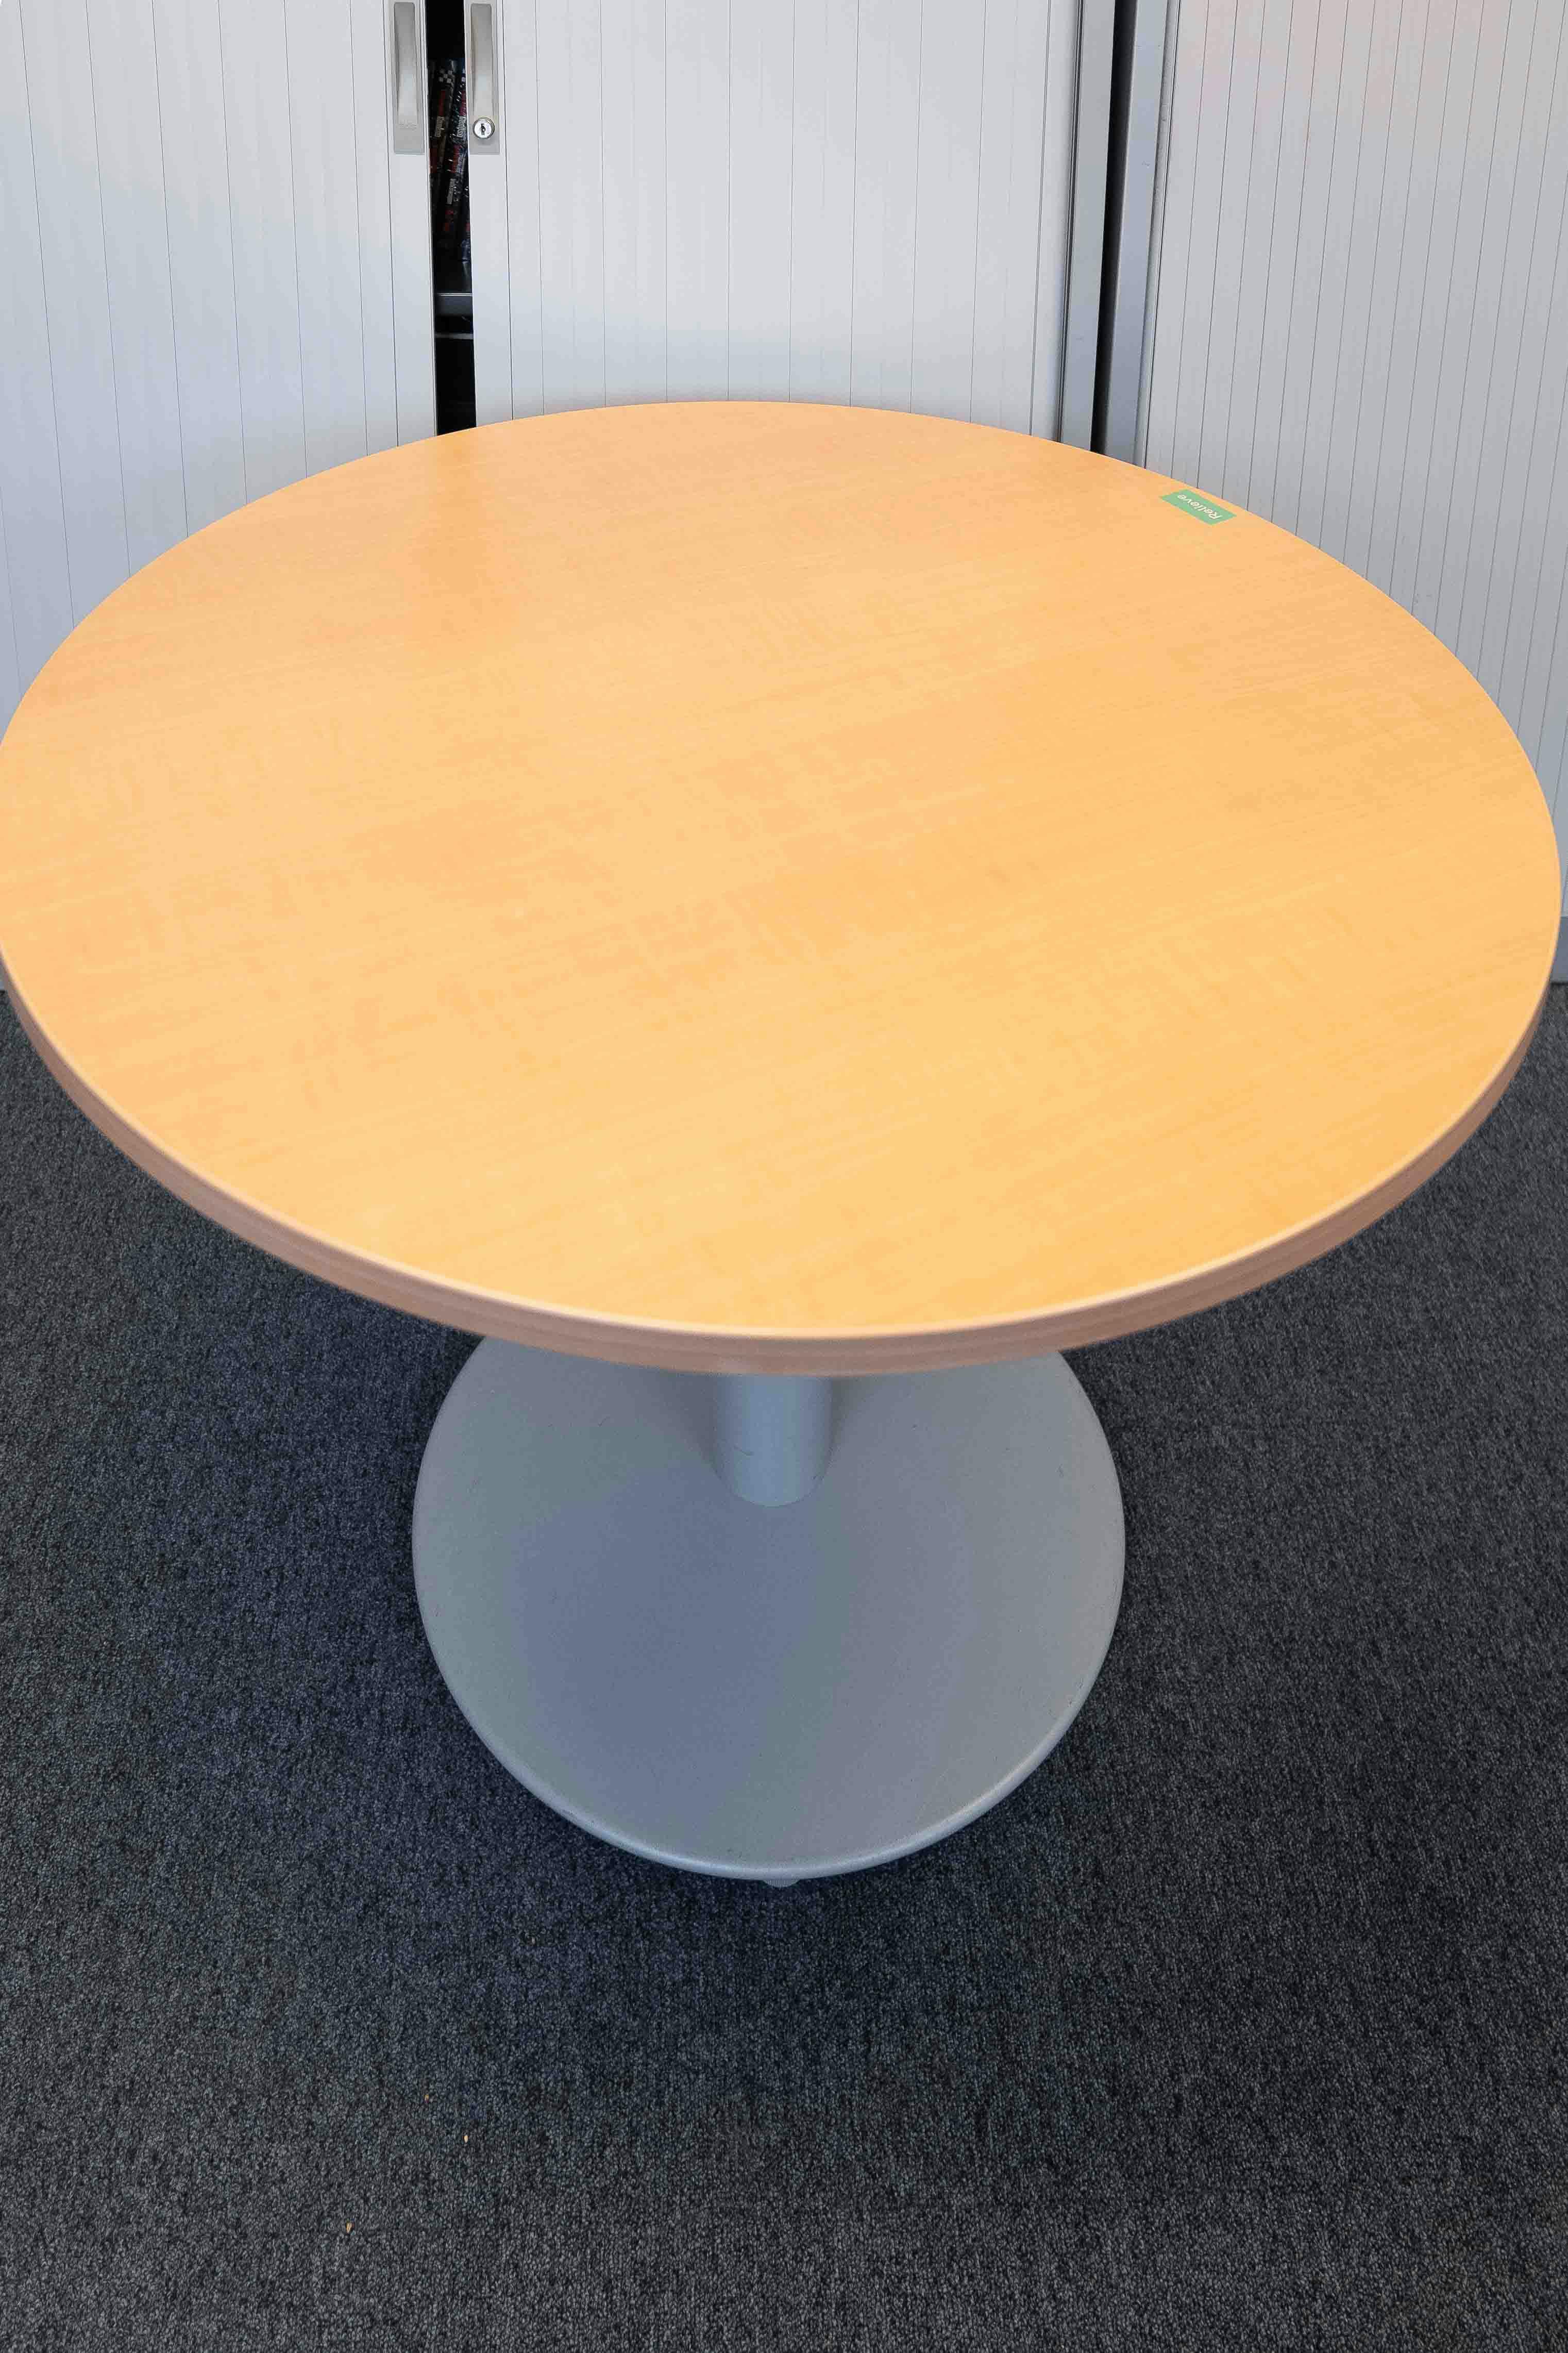 Round wood table with Grey leg - Second hand quality "Tables" - Relieve Furniture